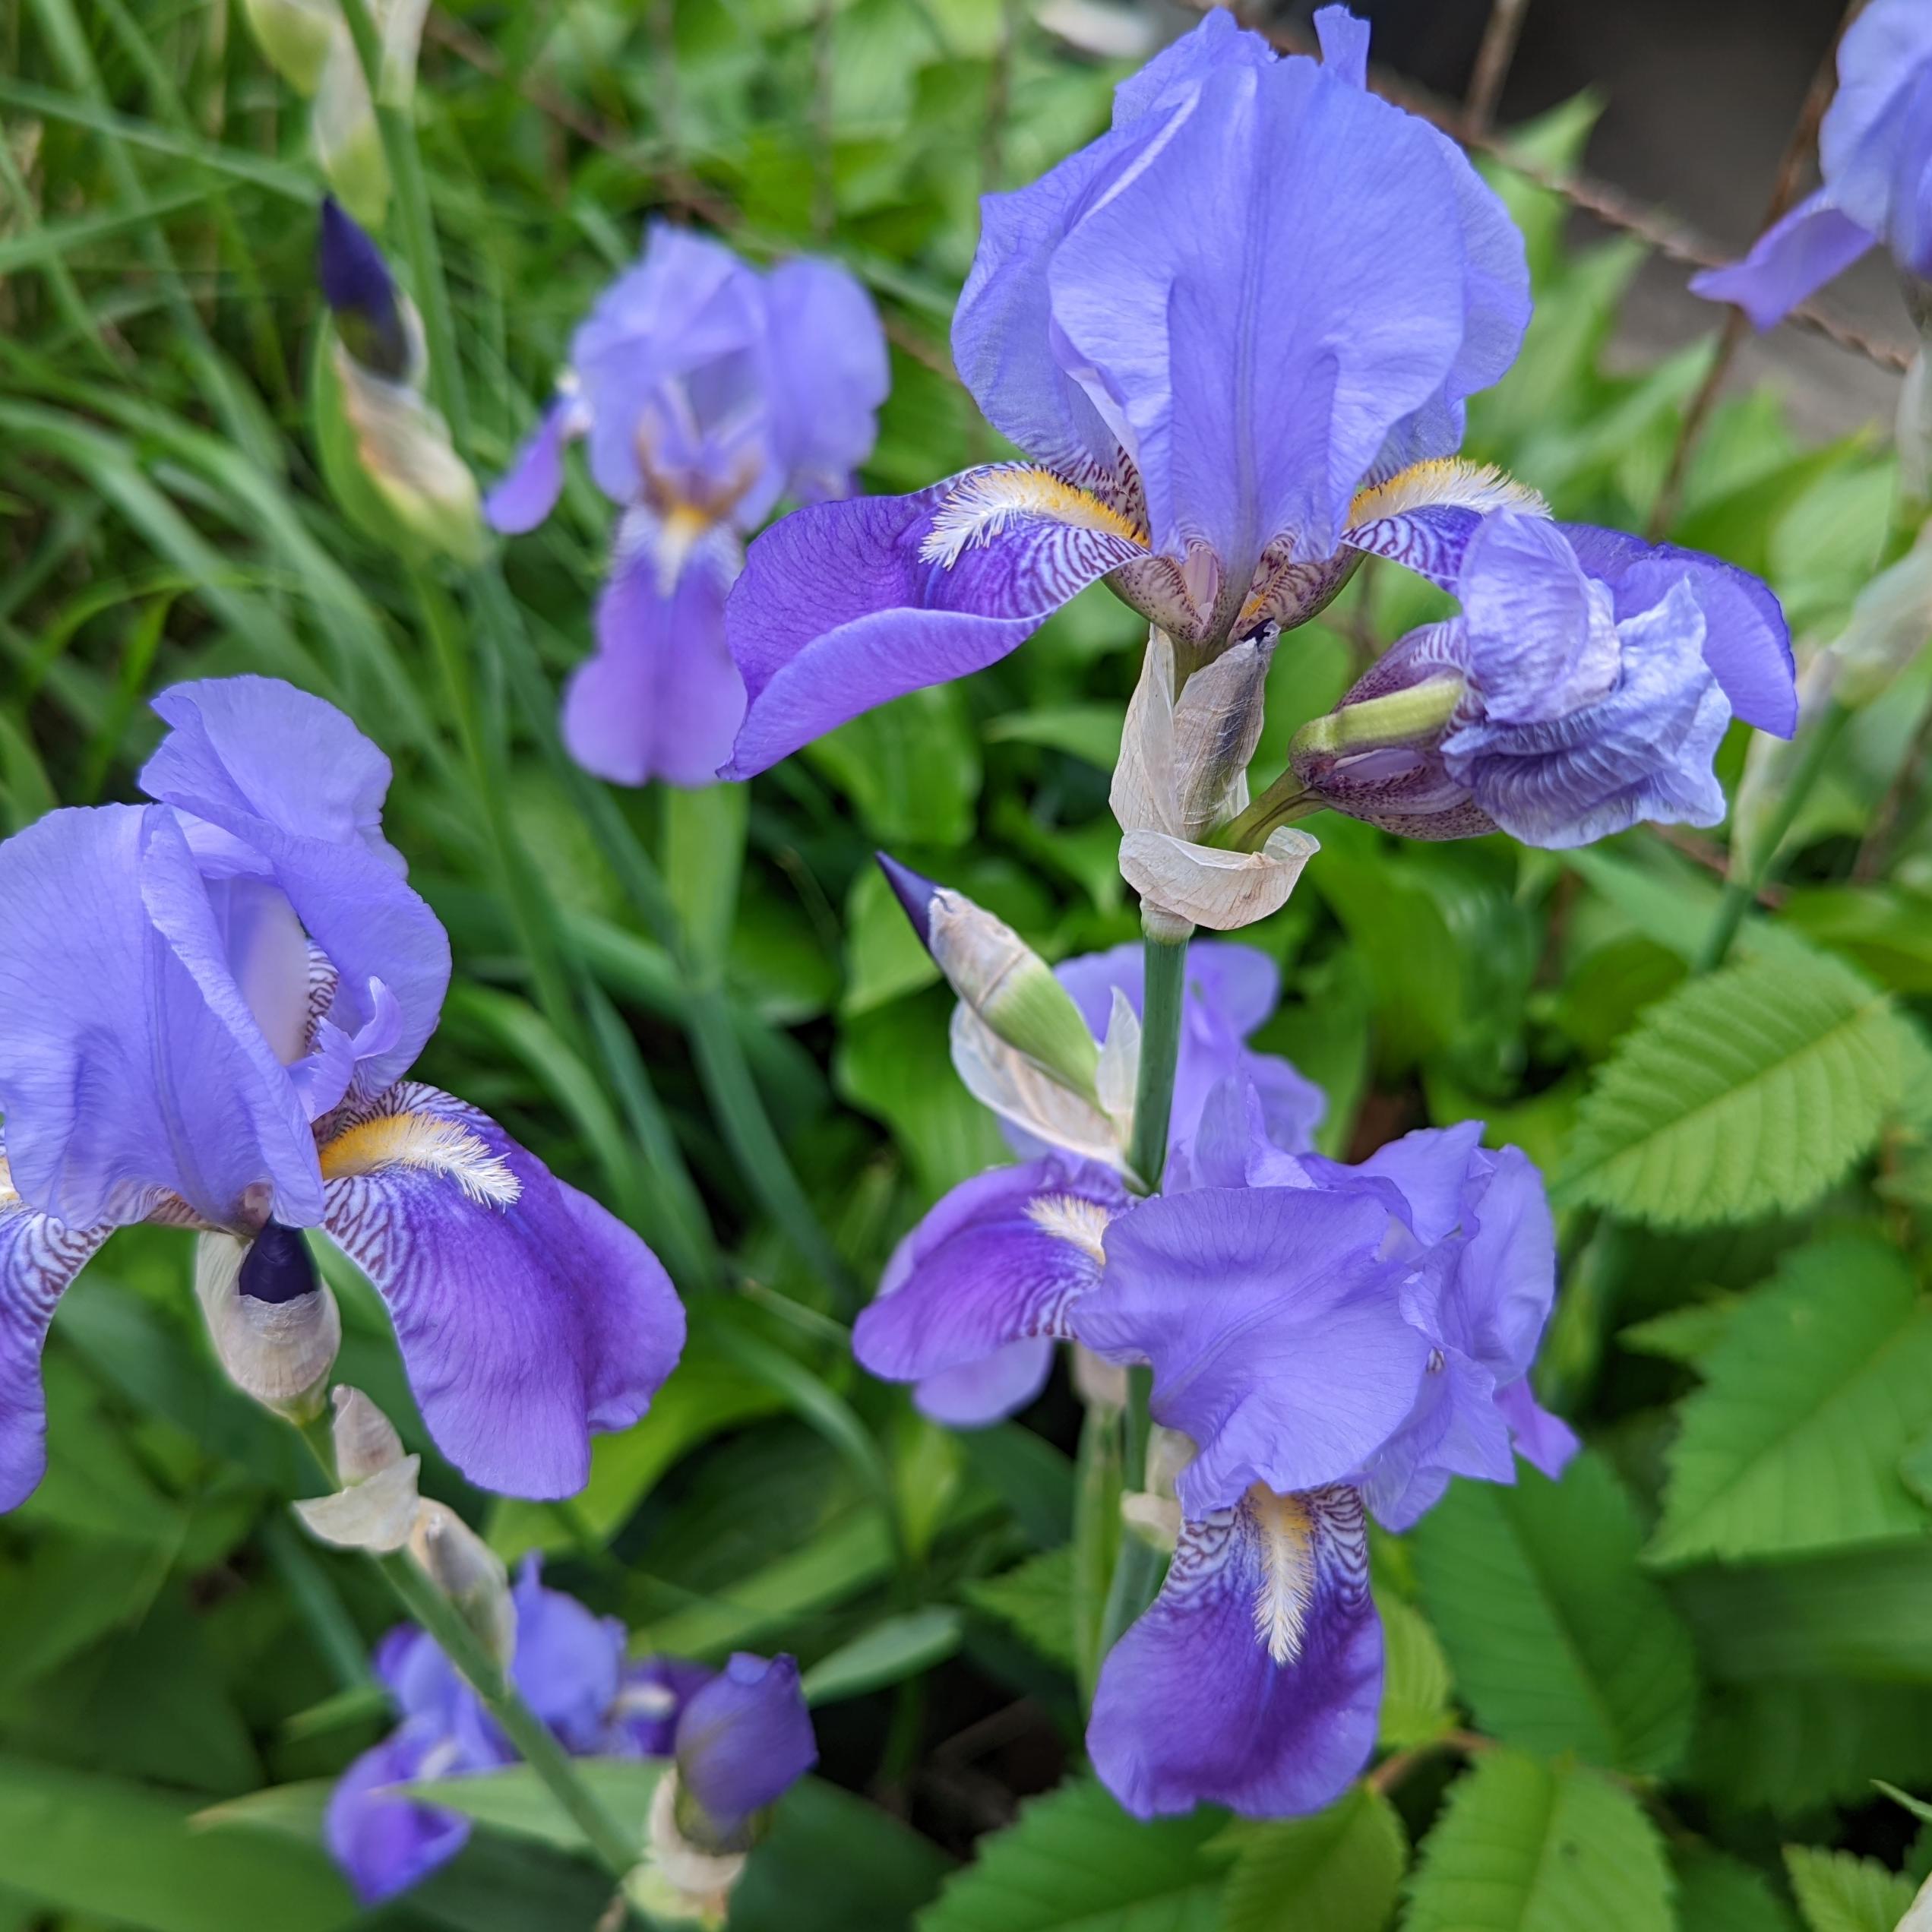 A photograph of purple flowers growing among fresh green leaves.